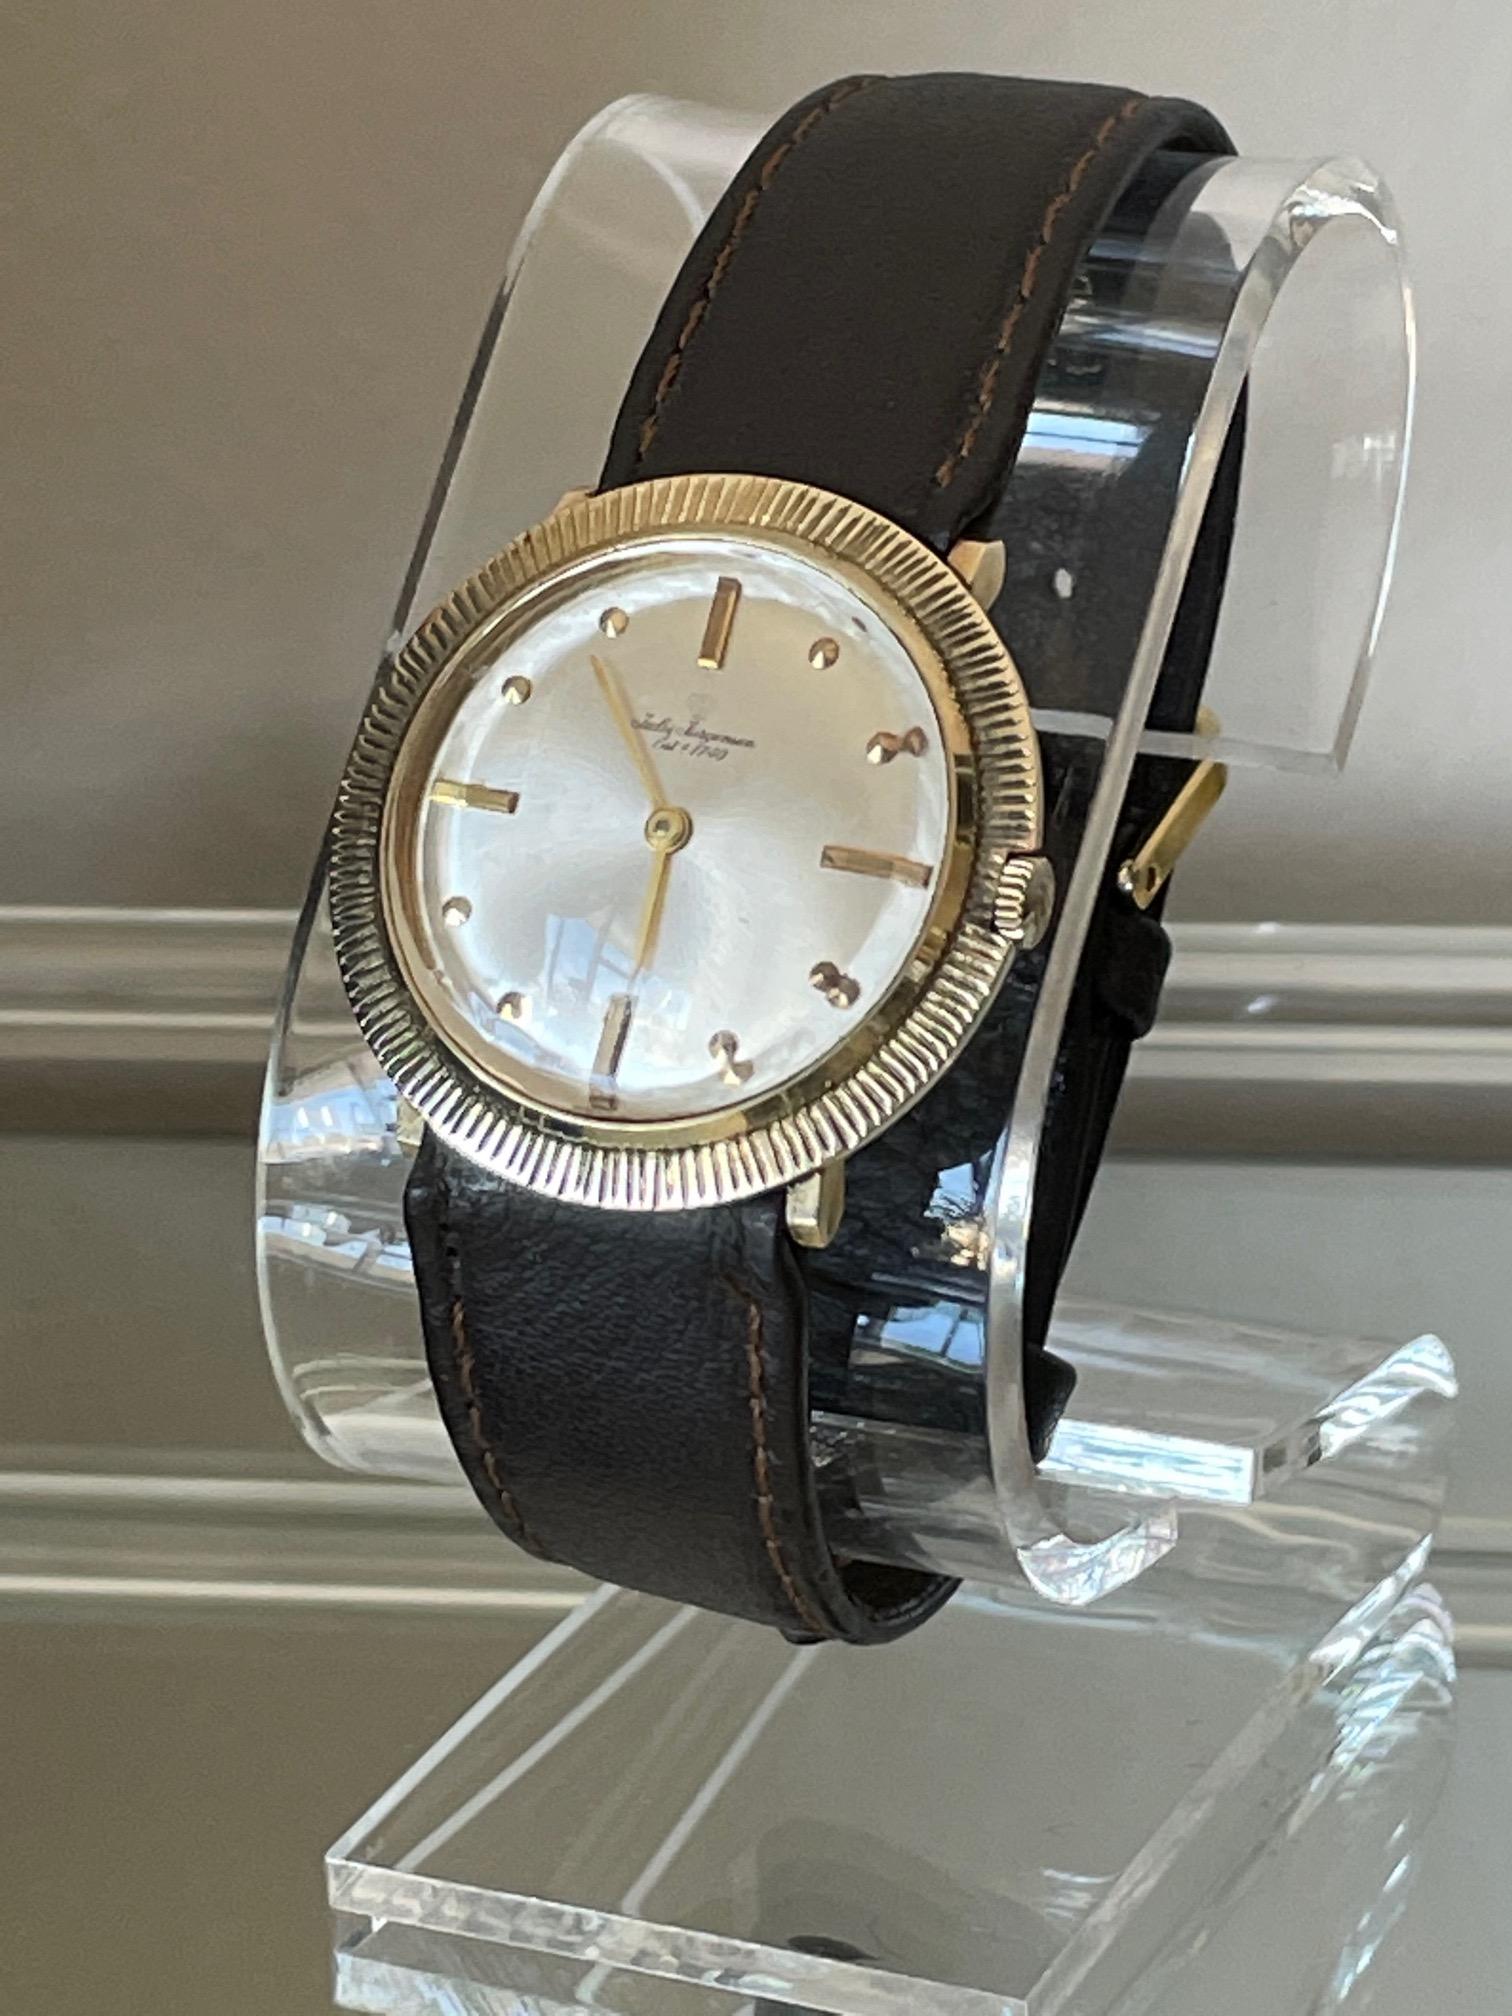 An unusual and early 1970s high style Jules Jurgensen wristwatch. Mechanical wind complete with original box, guarantee and hang tag-a real time warp. Unusual case in 14-karat yellow gold features a beautiful Brutalist style coin edge and recessed